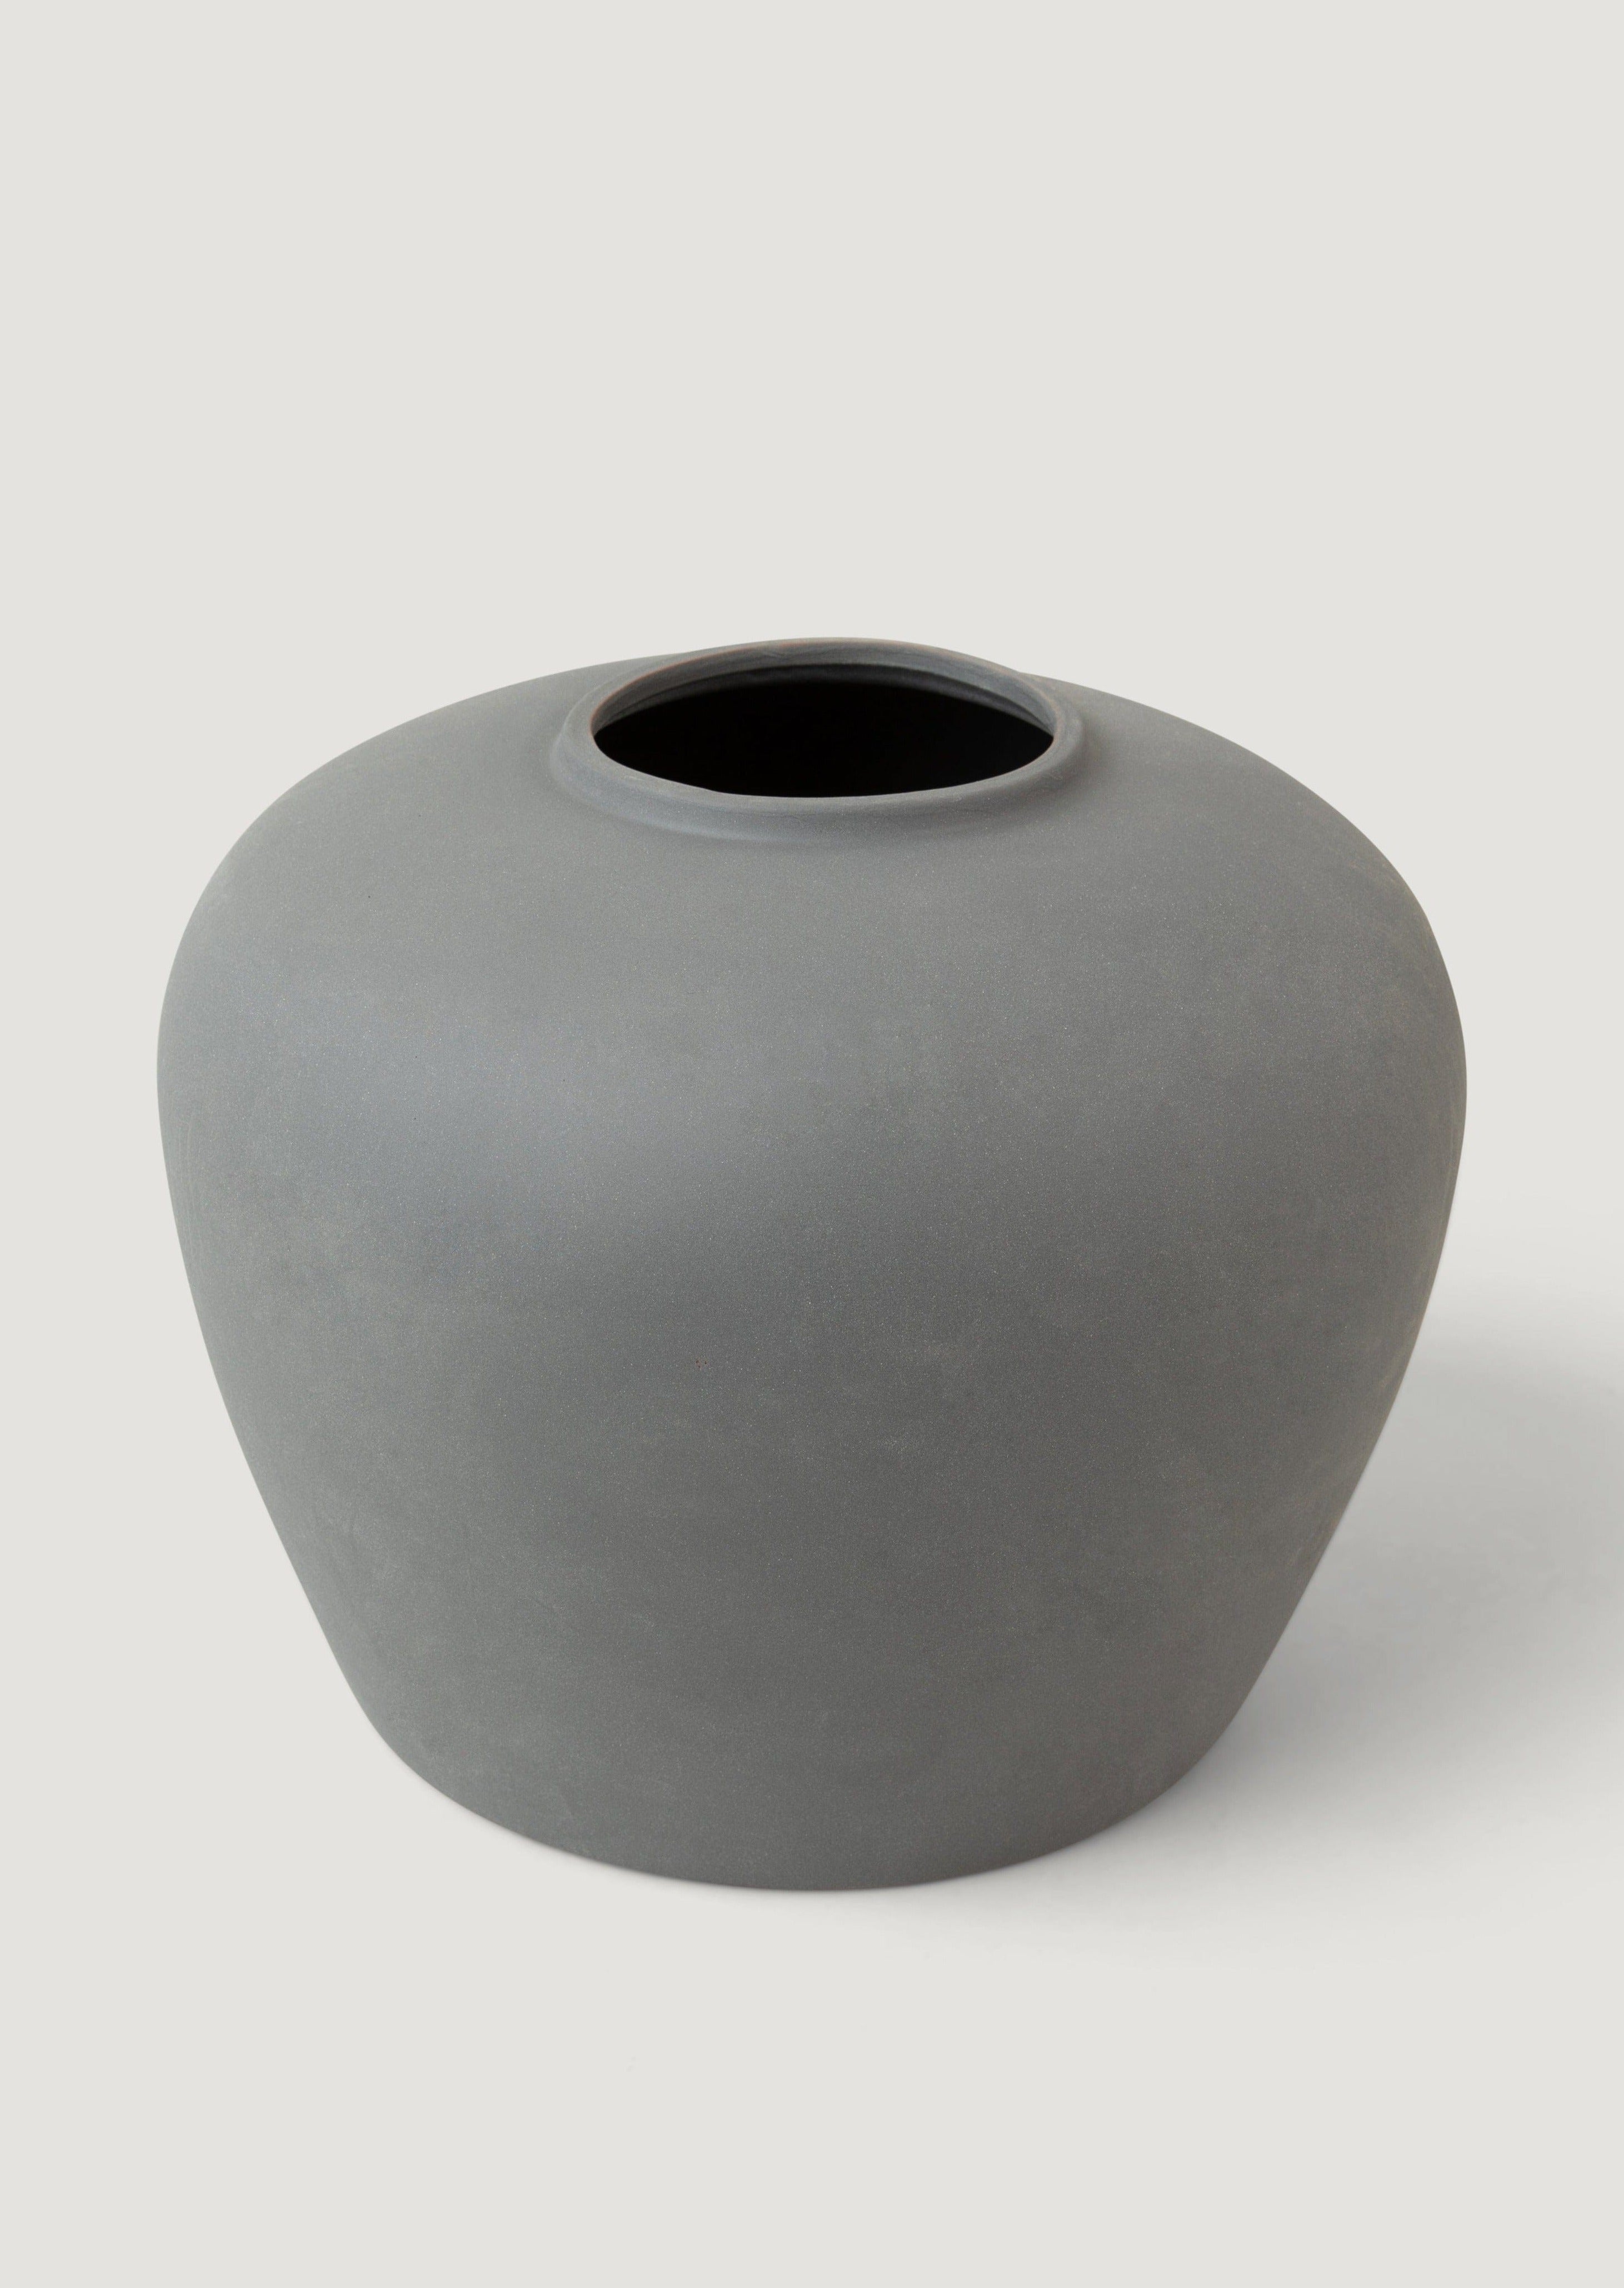 Exclusive Smokey Slate Large Clay Vase at afloral